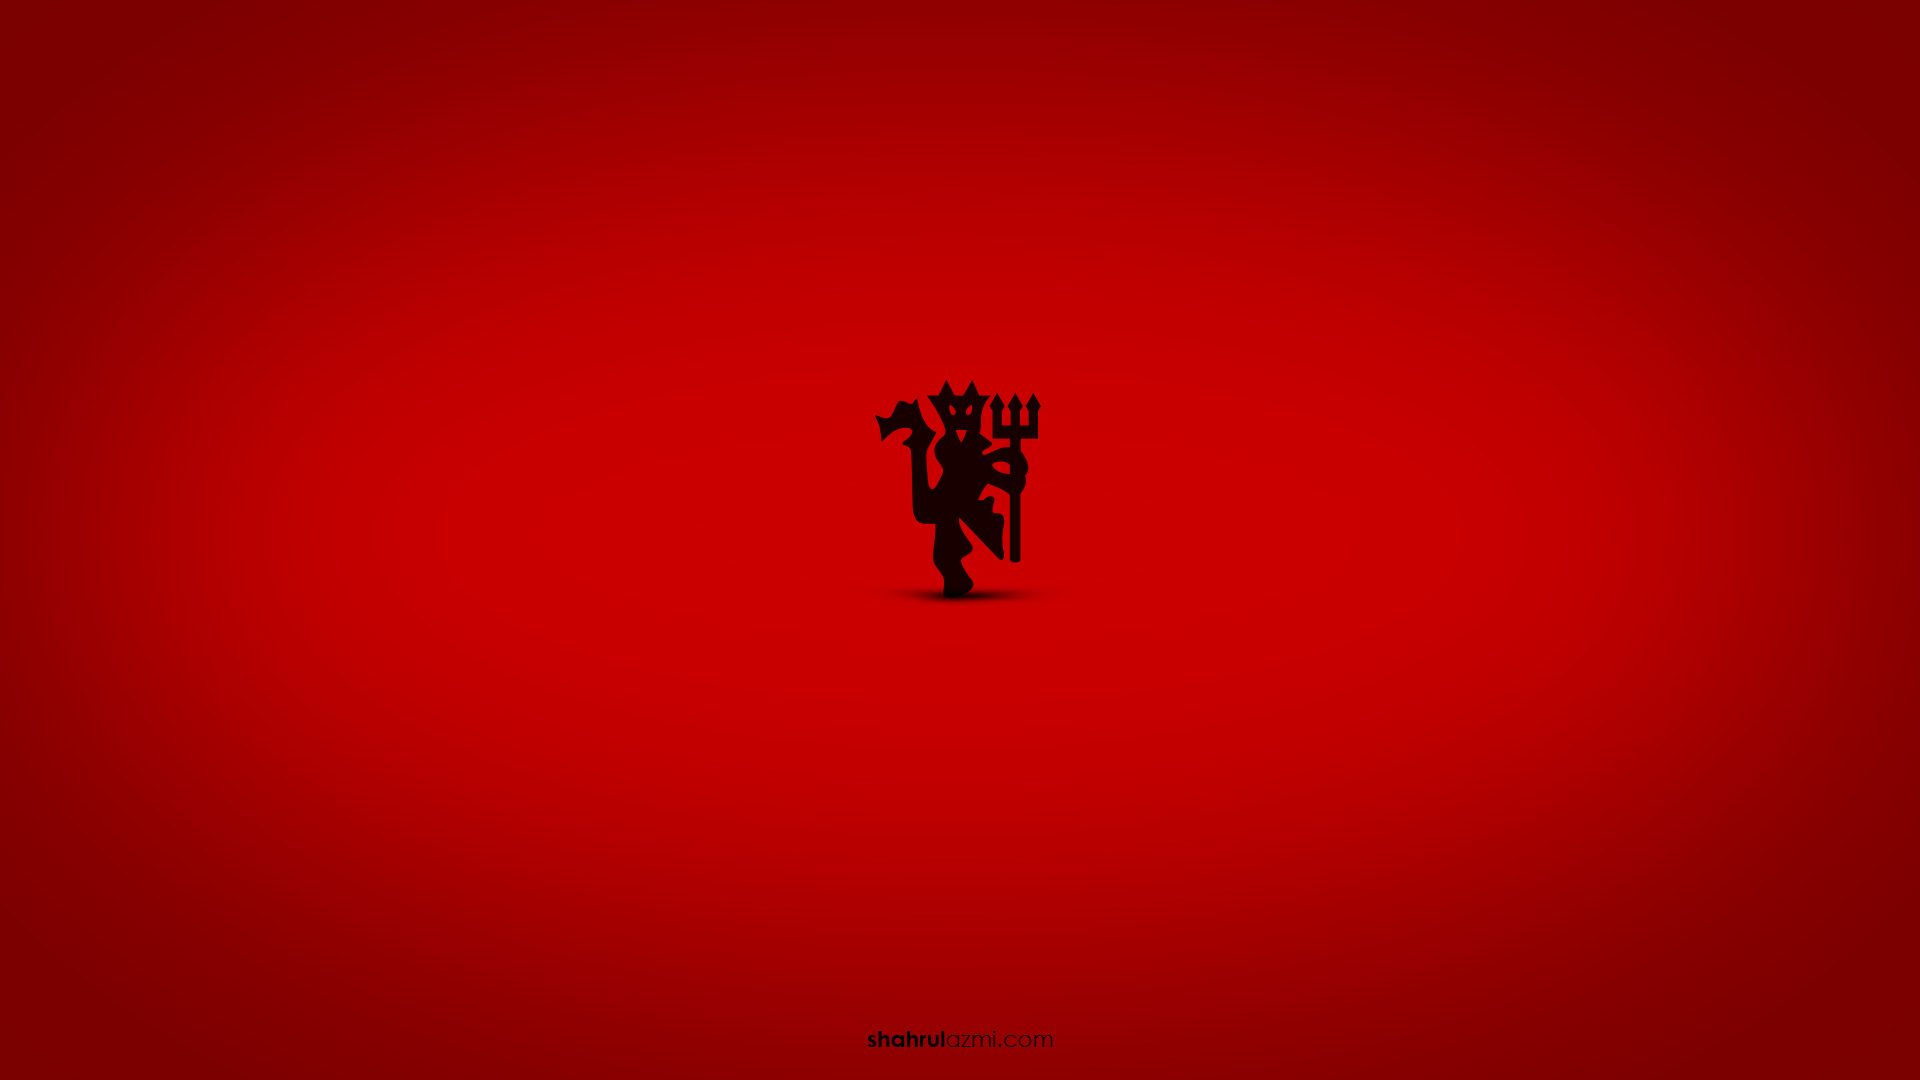 Man Utd HD Logo Wallapapers For Desktop Collection